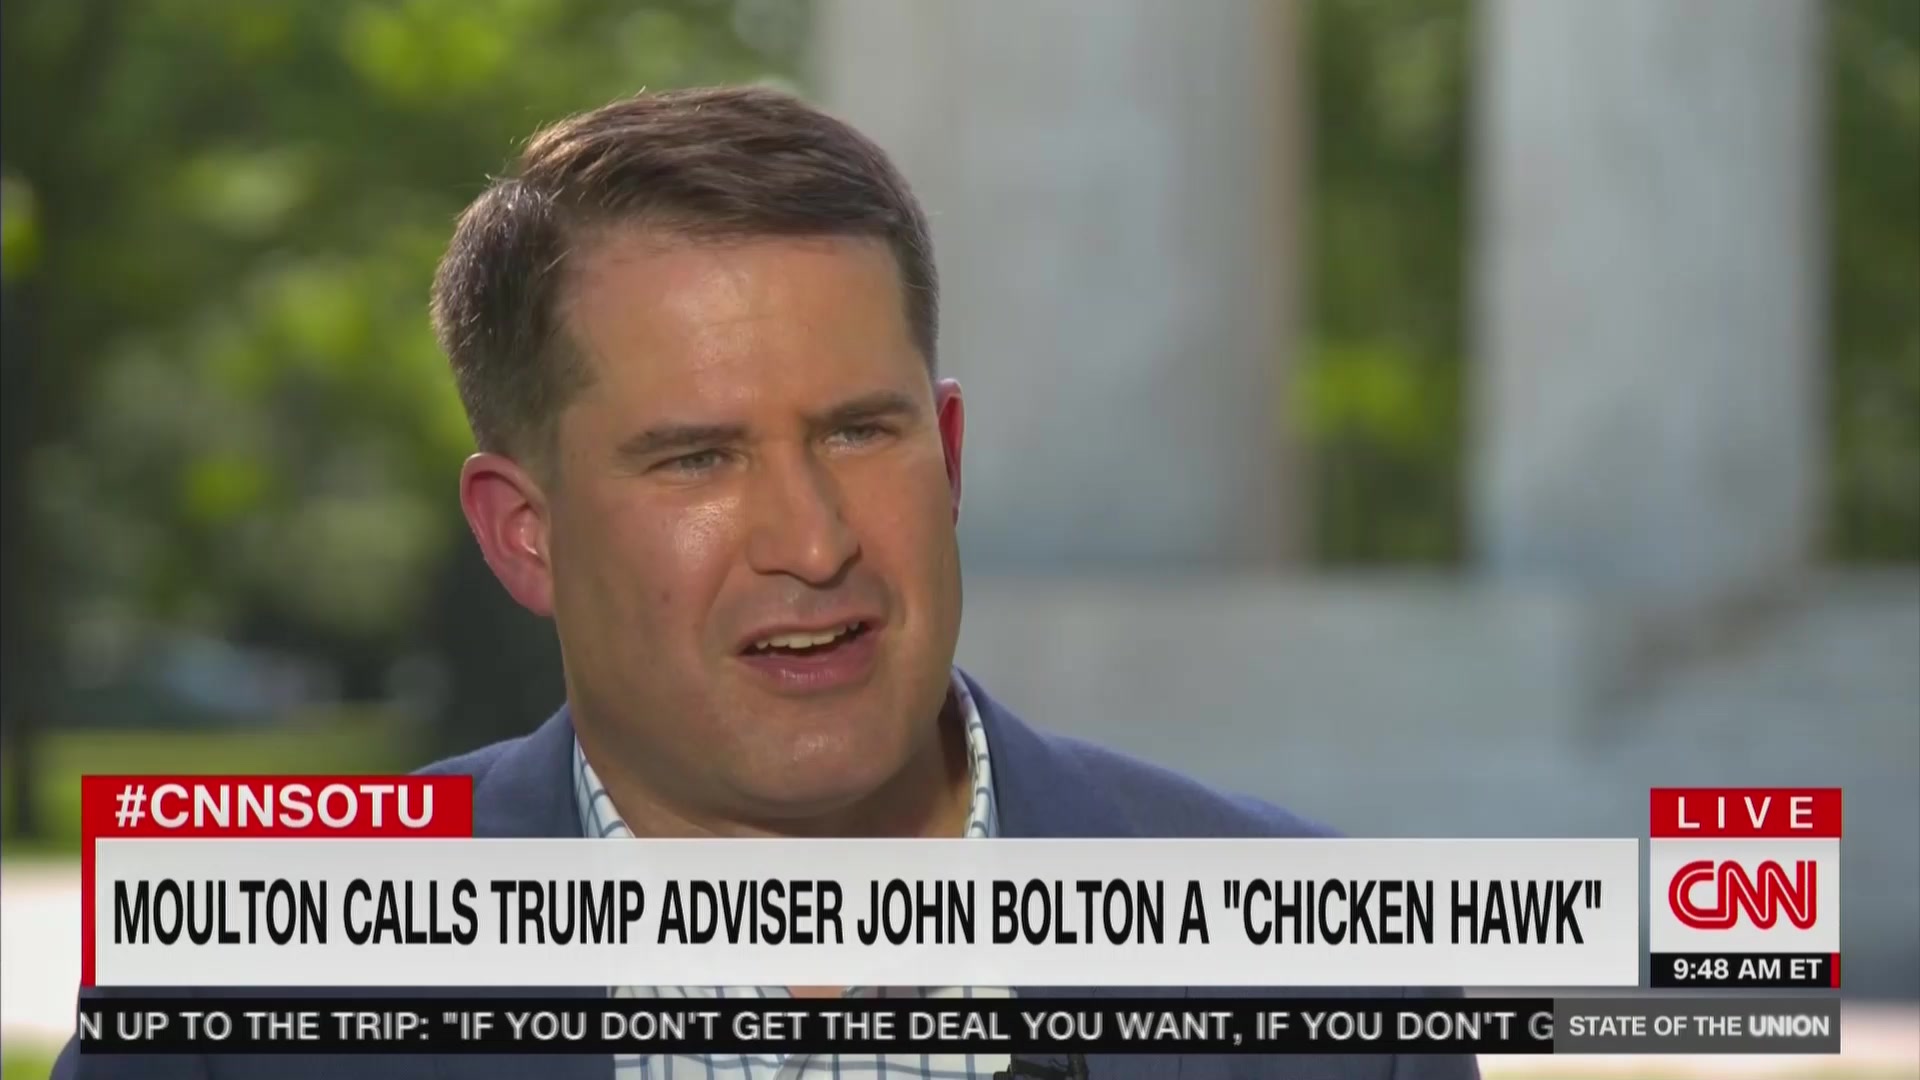 Seth Moulton: If You Looked Up ‘Chicken Hawk in a Dictionary,’ You’d See Trump and Bolton Next to Each Other